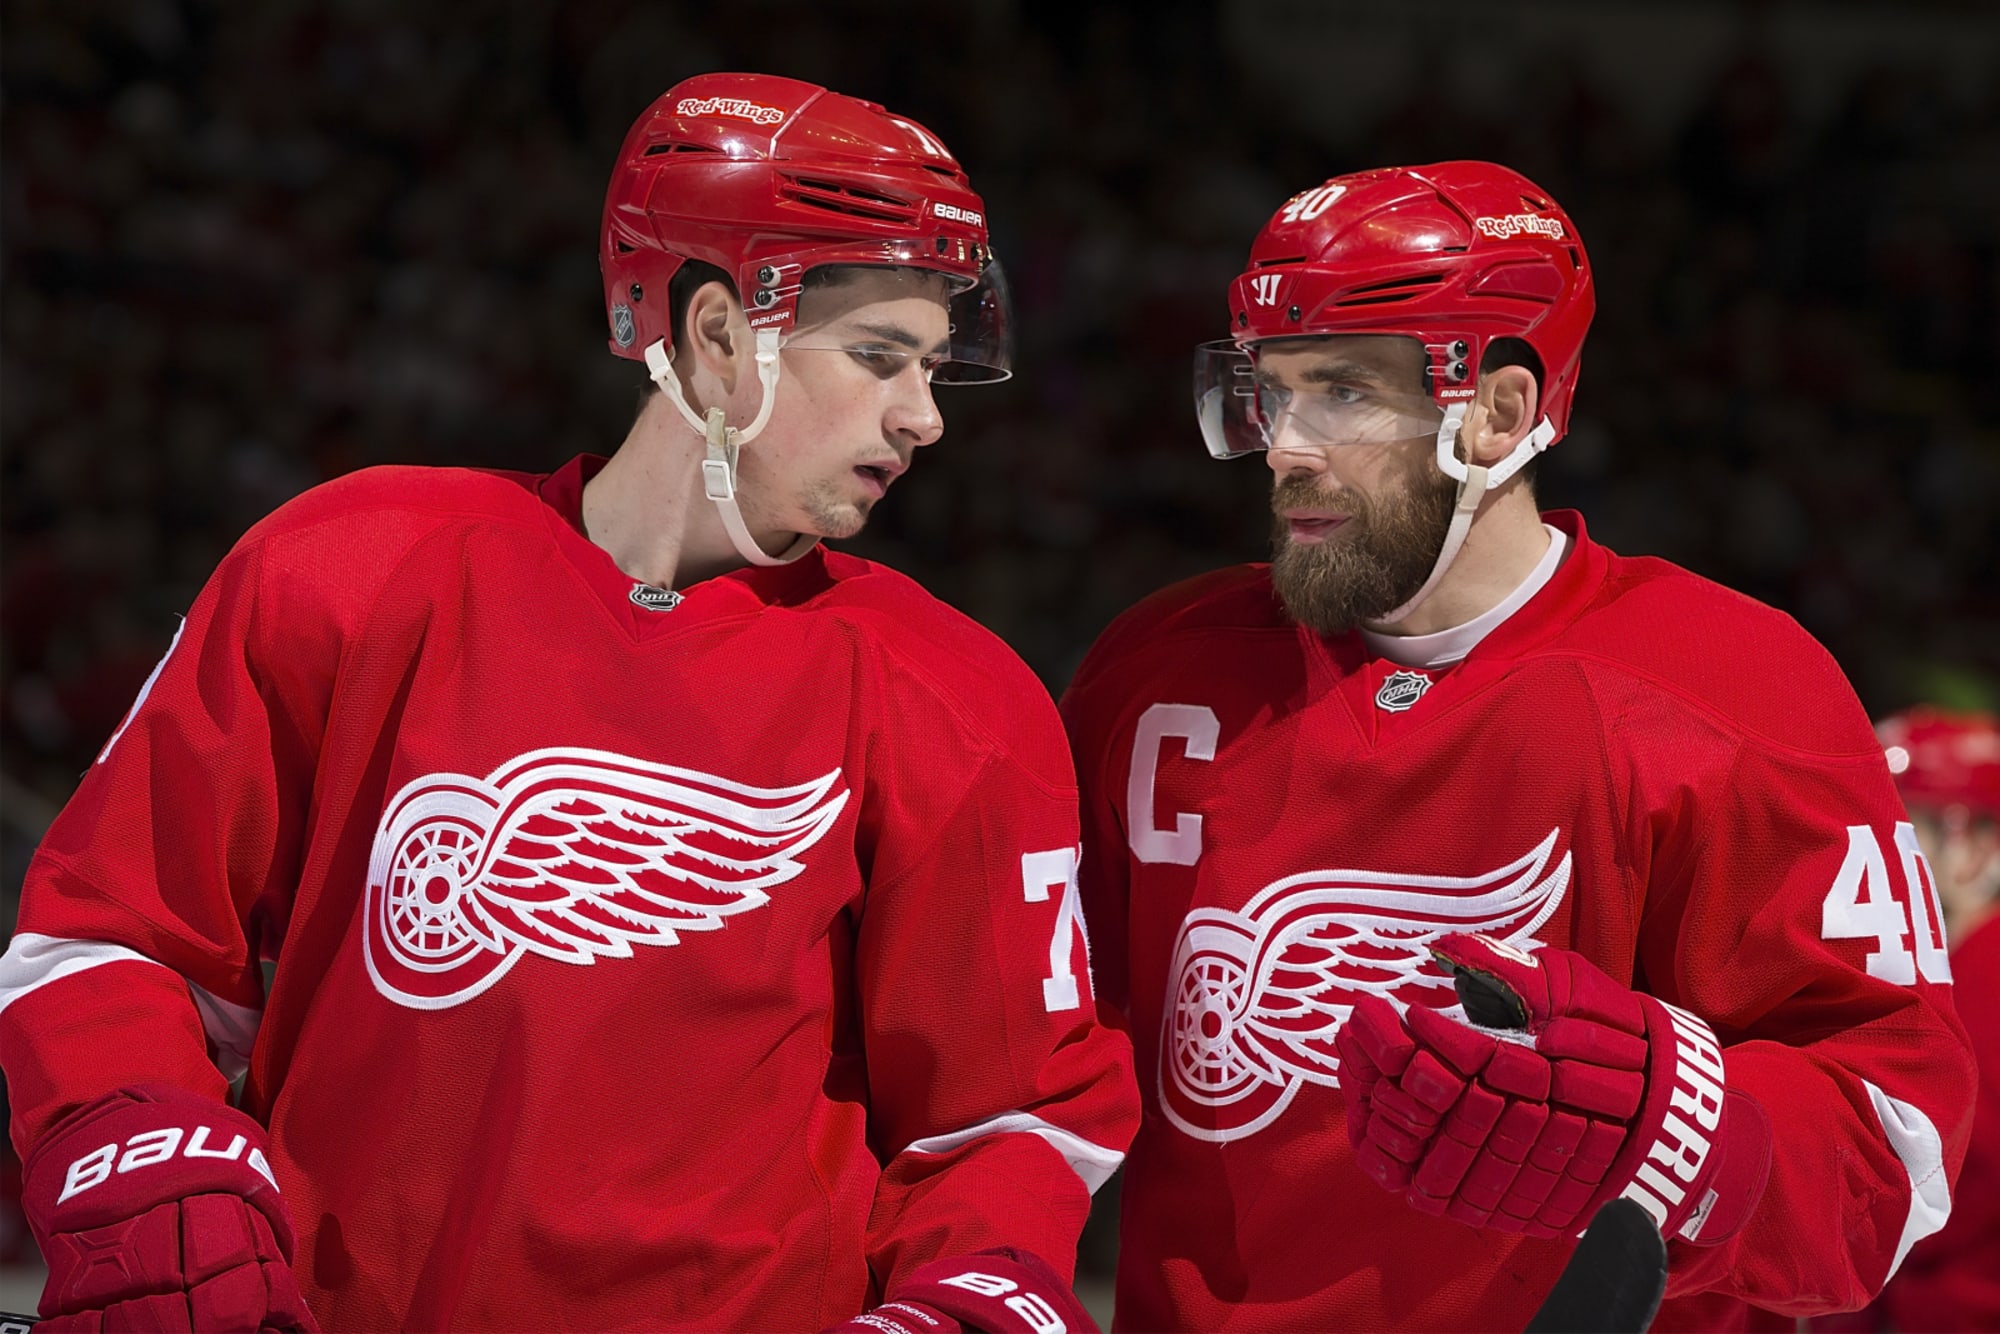 Toronto Maple Leafs vs. Detroit Red Wings - Game #40 Preview